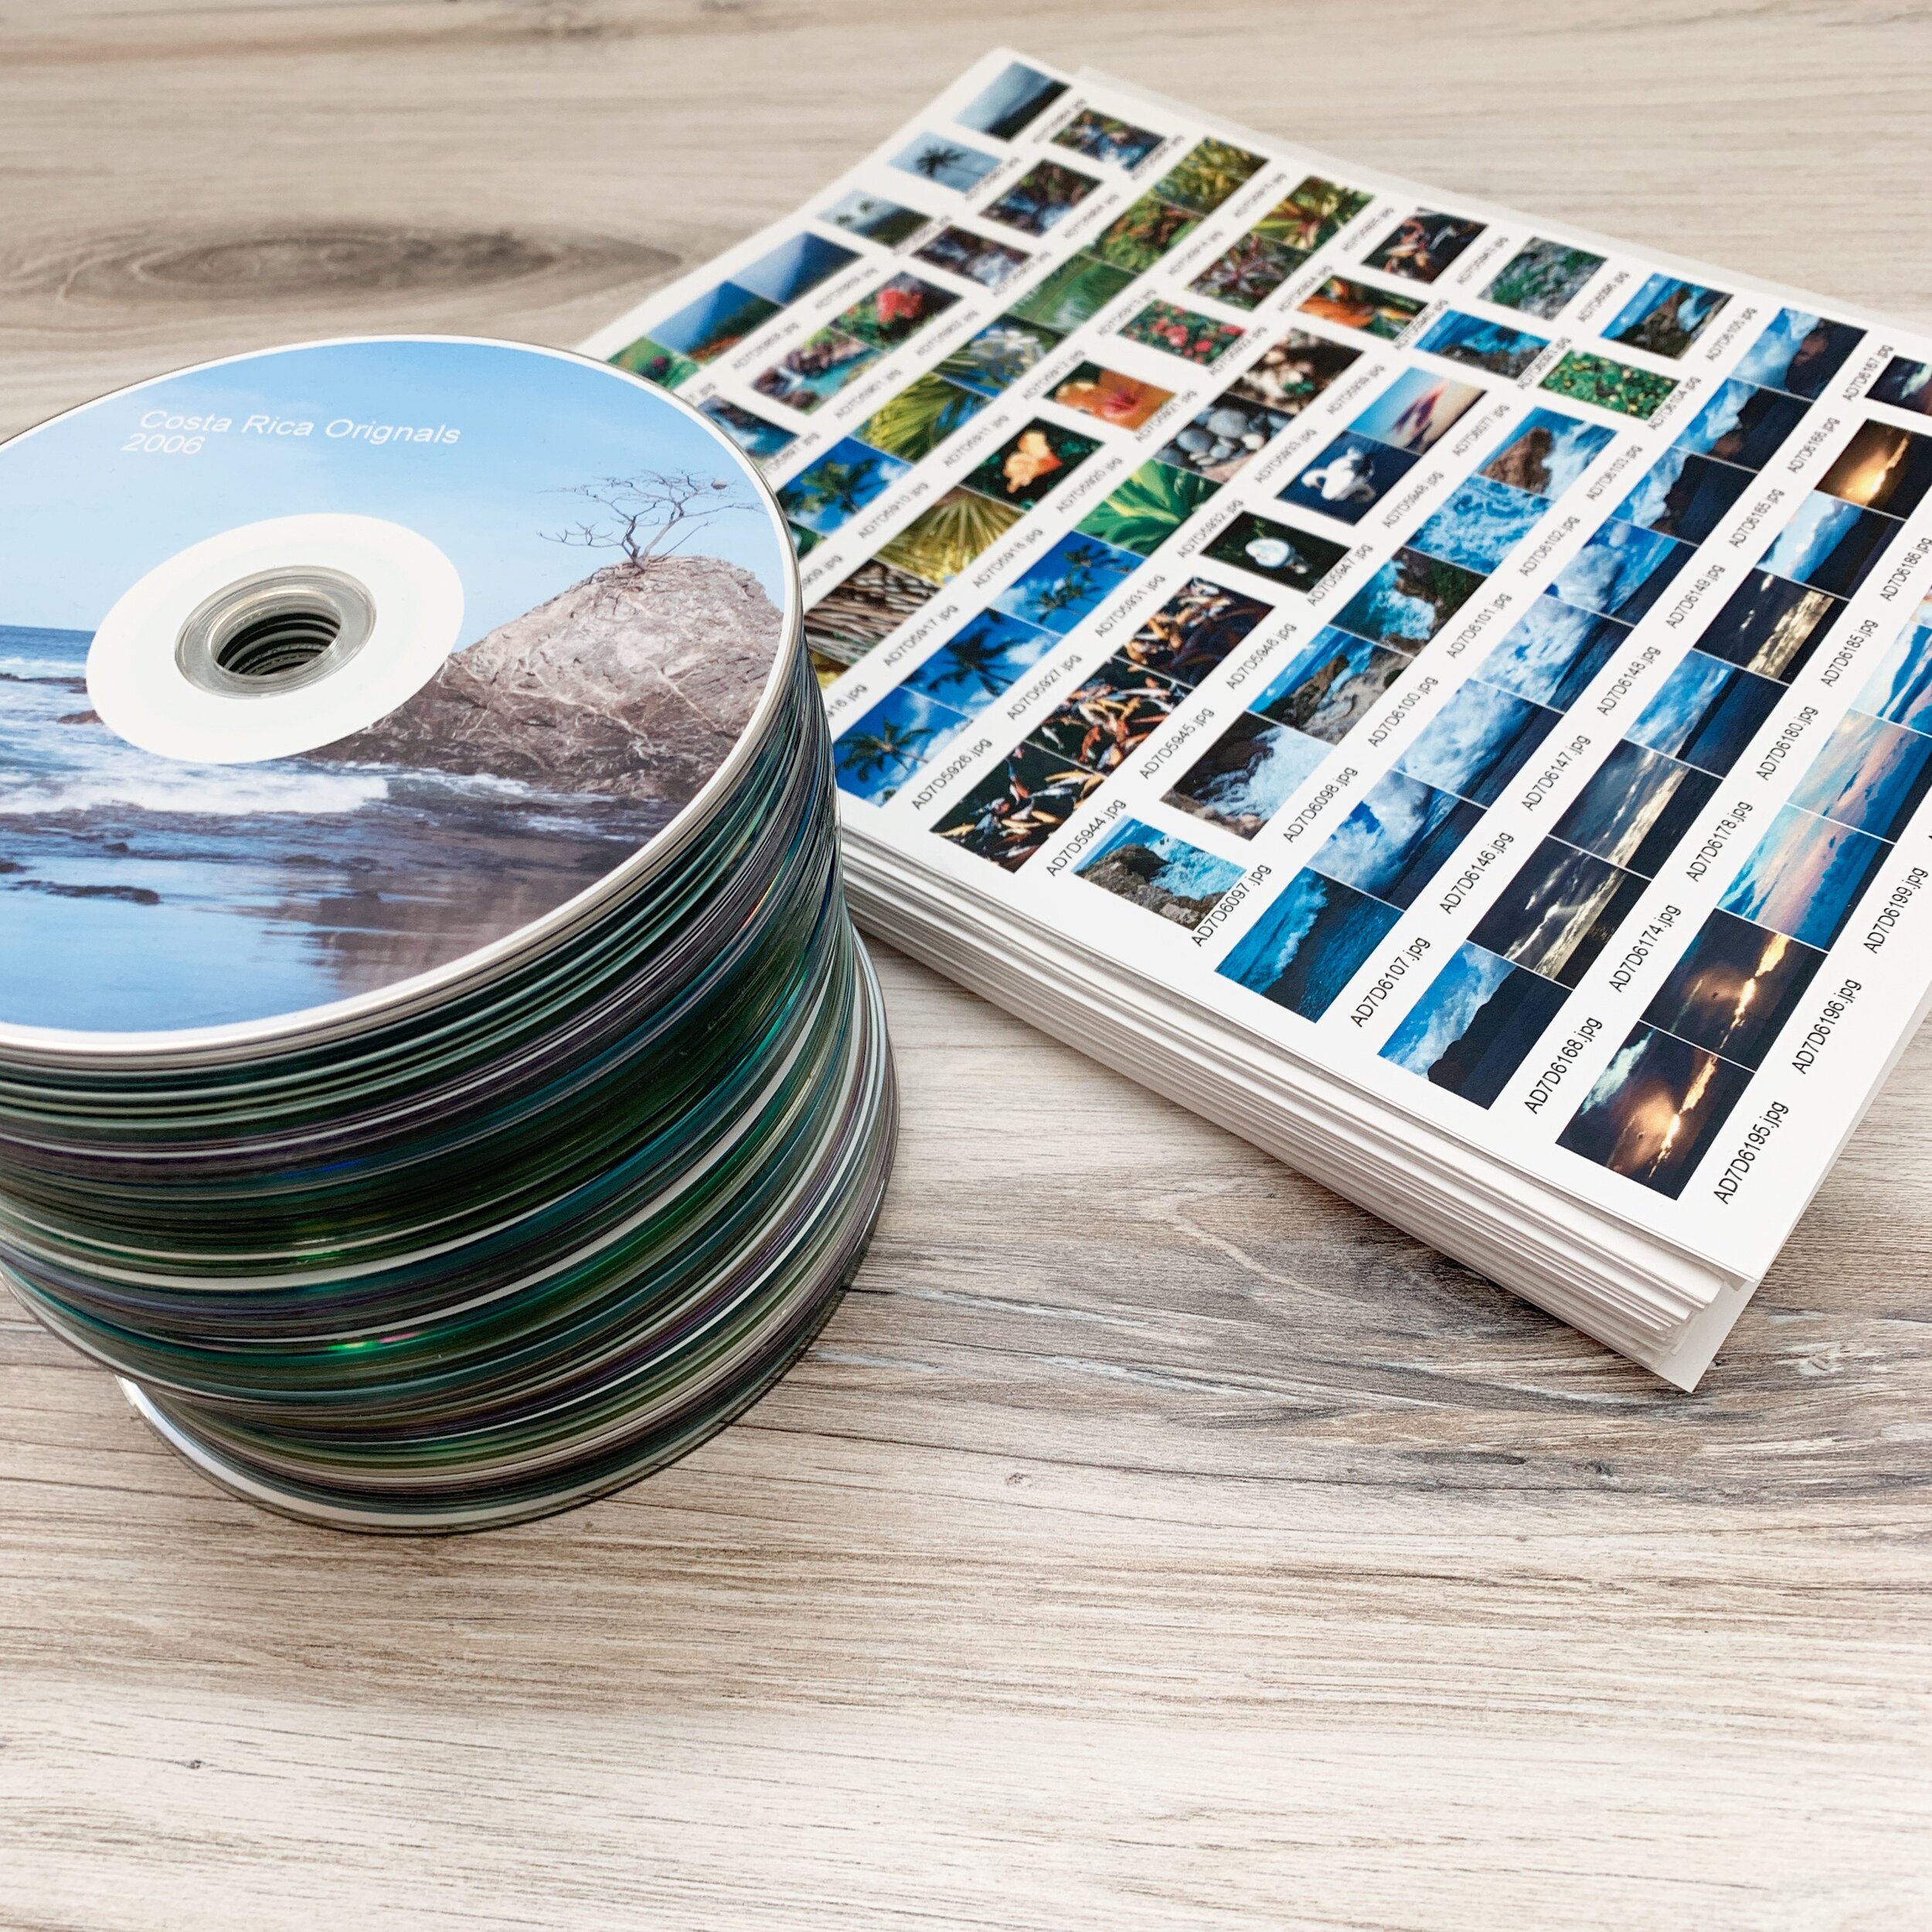 Are your photos safe on CDs? How to safely back them up. — Photo Burrito